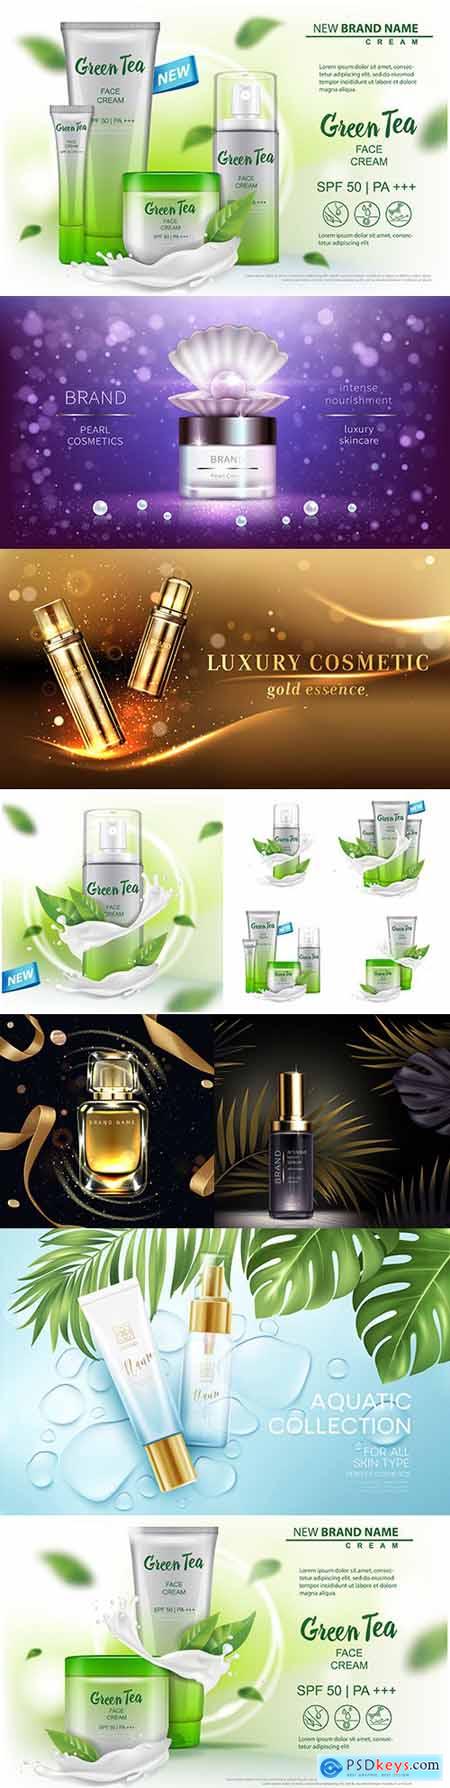 Cosmetic product advertising for magazine packaging design